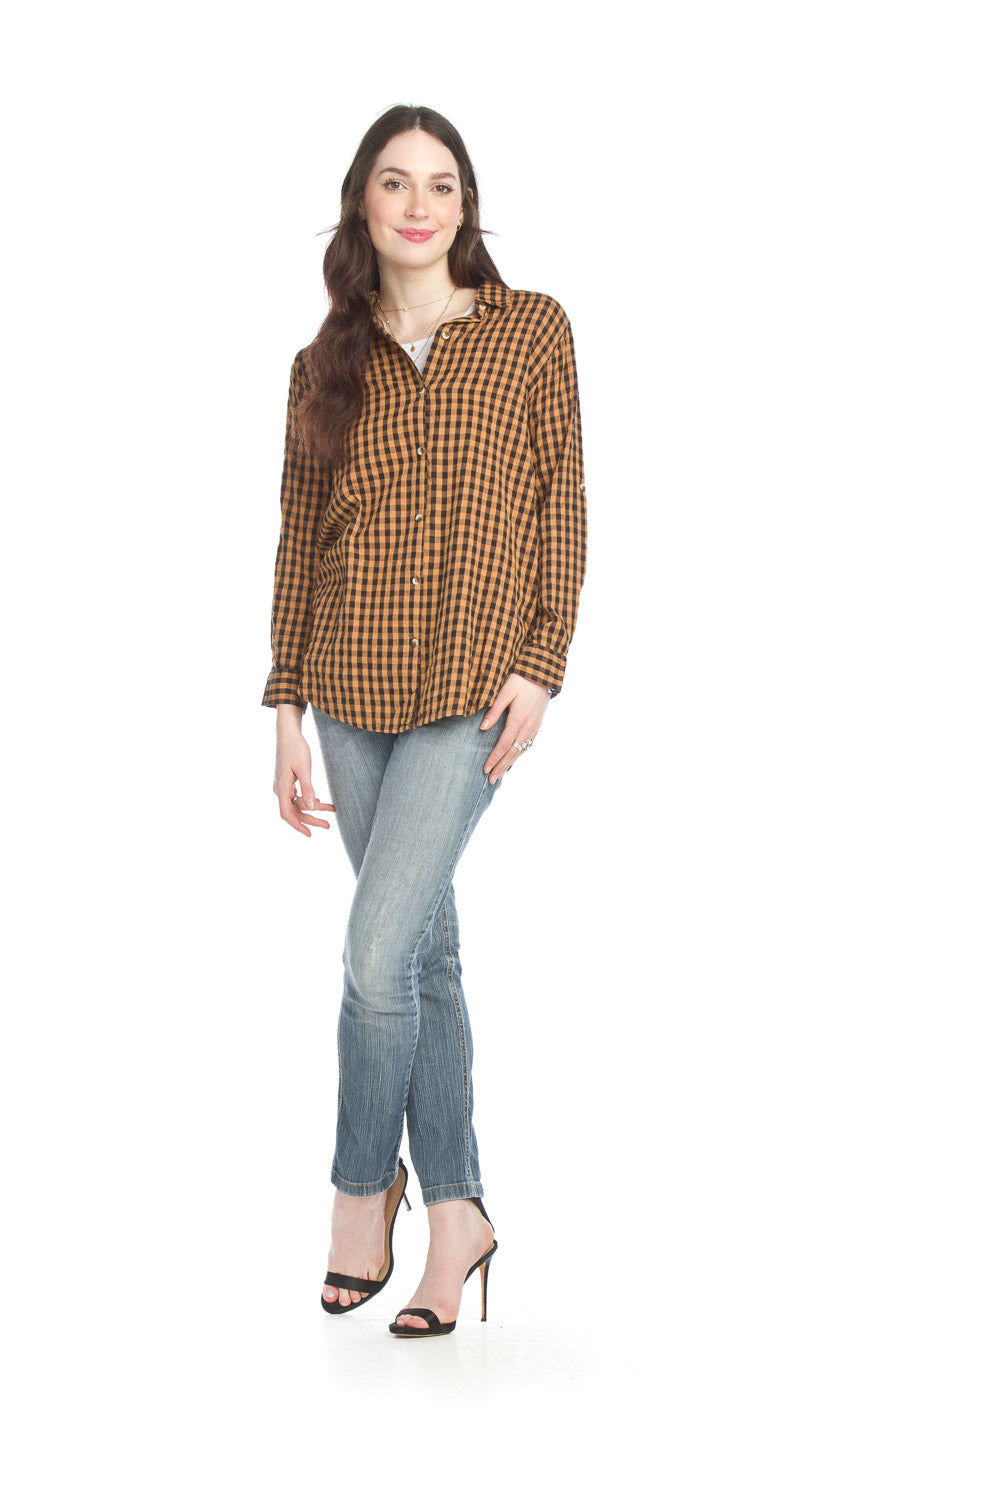 PT-13024 - Gingham Tunic with Tab Sleeves